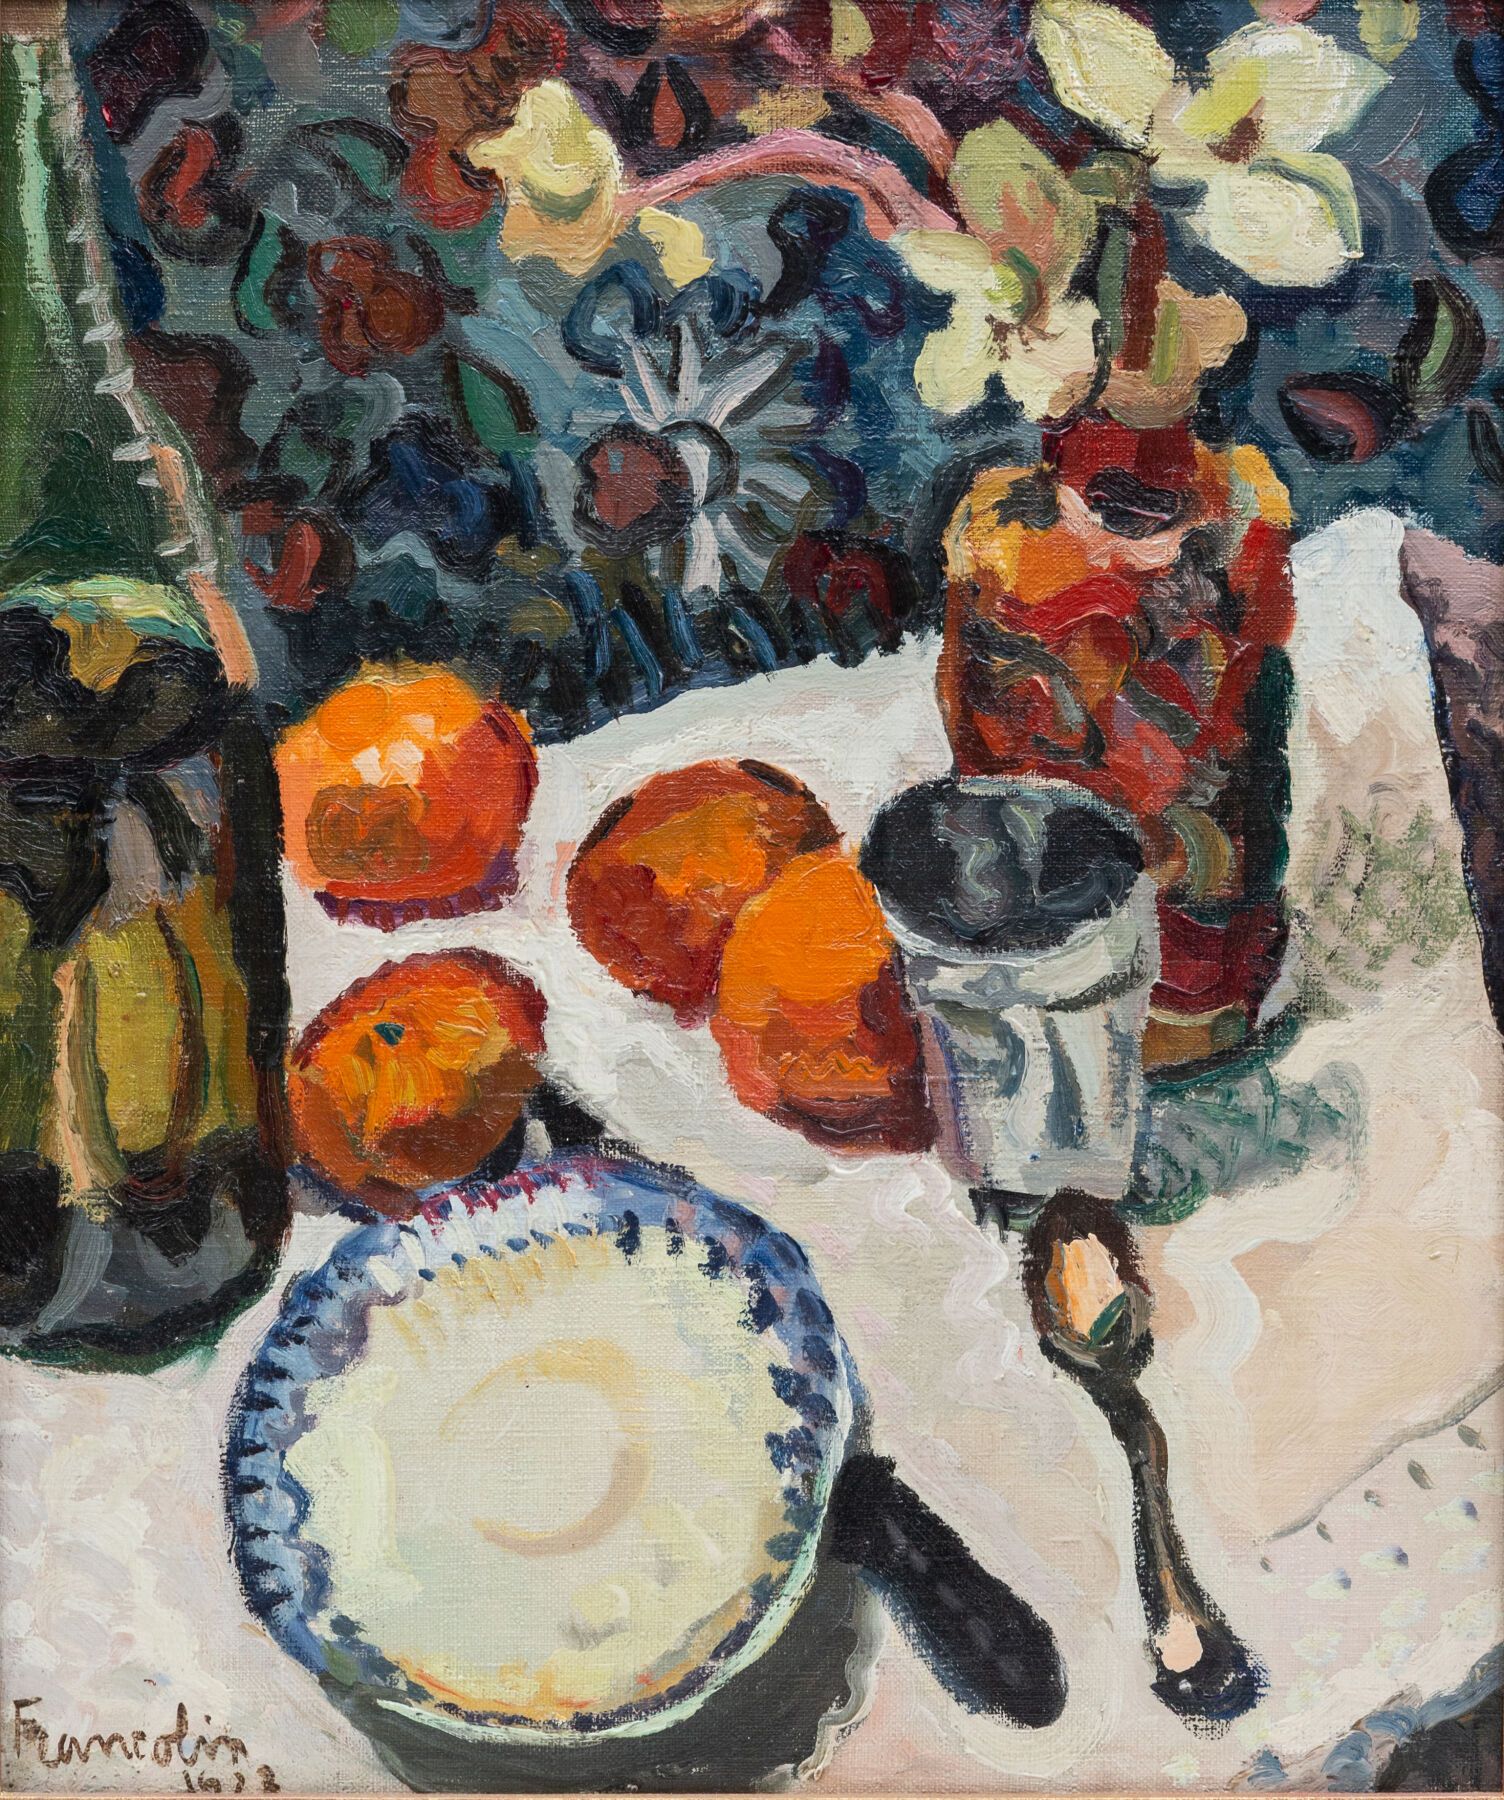 Null Robert FRANCOLIN (1899-1974).

Still life with a table and oranges.

Oil on&hellip;